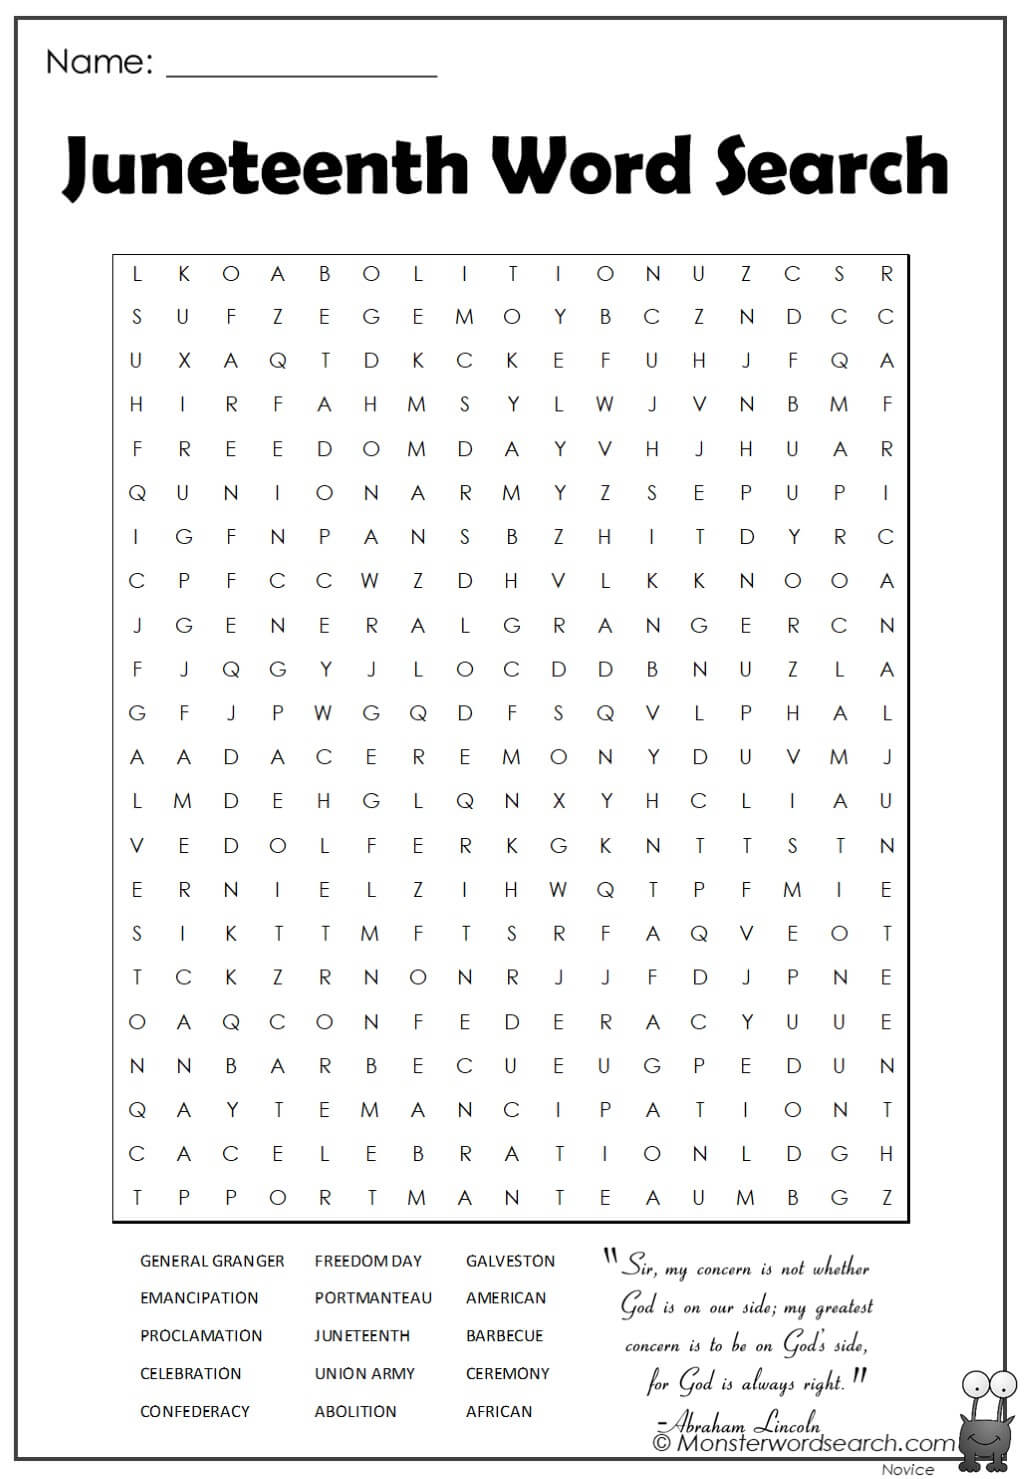 juneteenth-word-search-monster-word-search